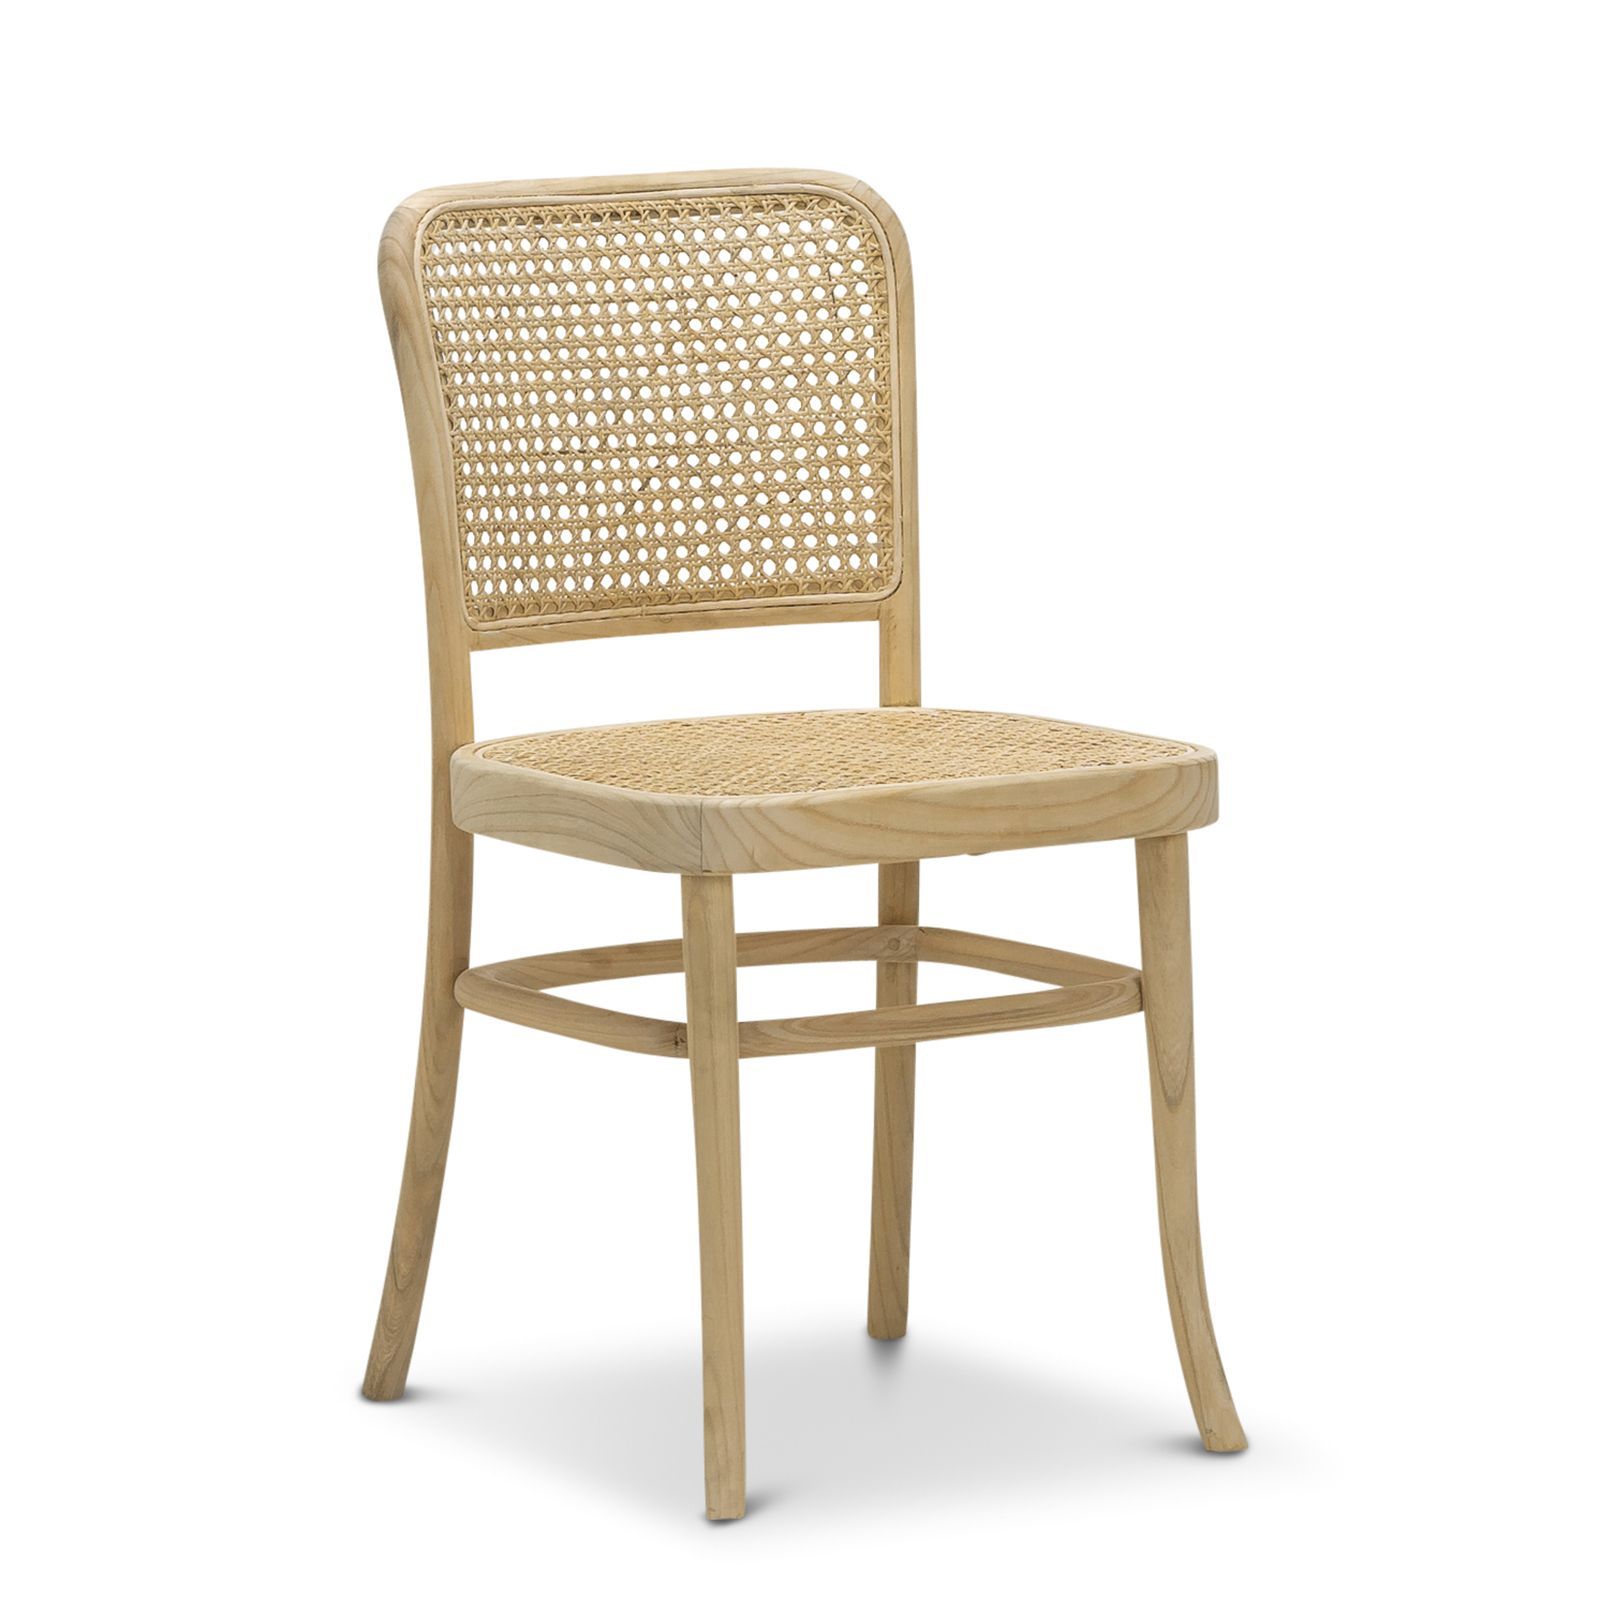 Set of 2 Amara Teak Wood Cane Dining Chair - Natural - Dining Chairs